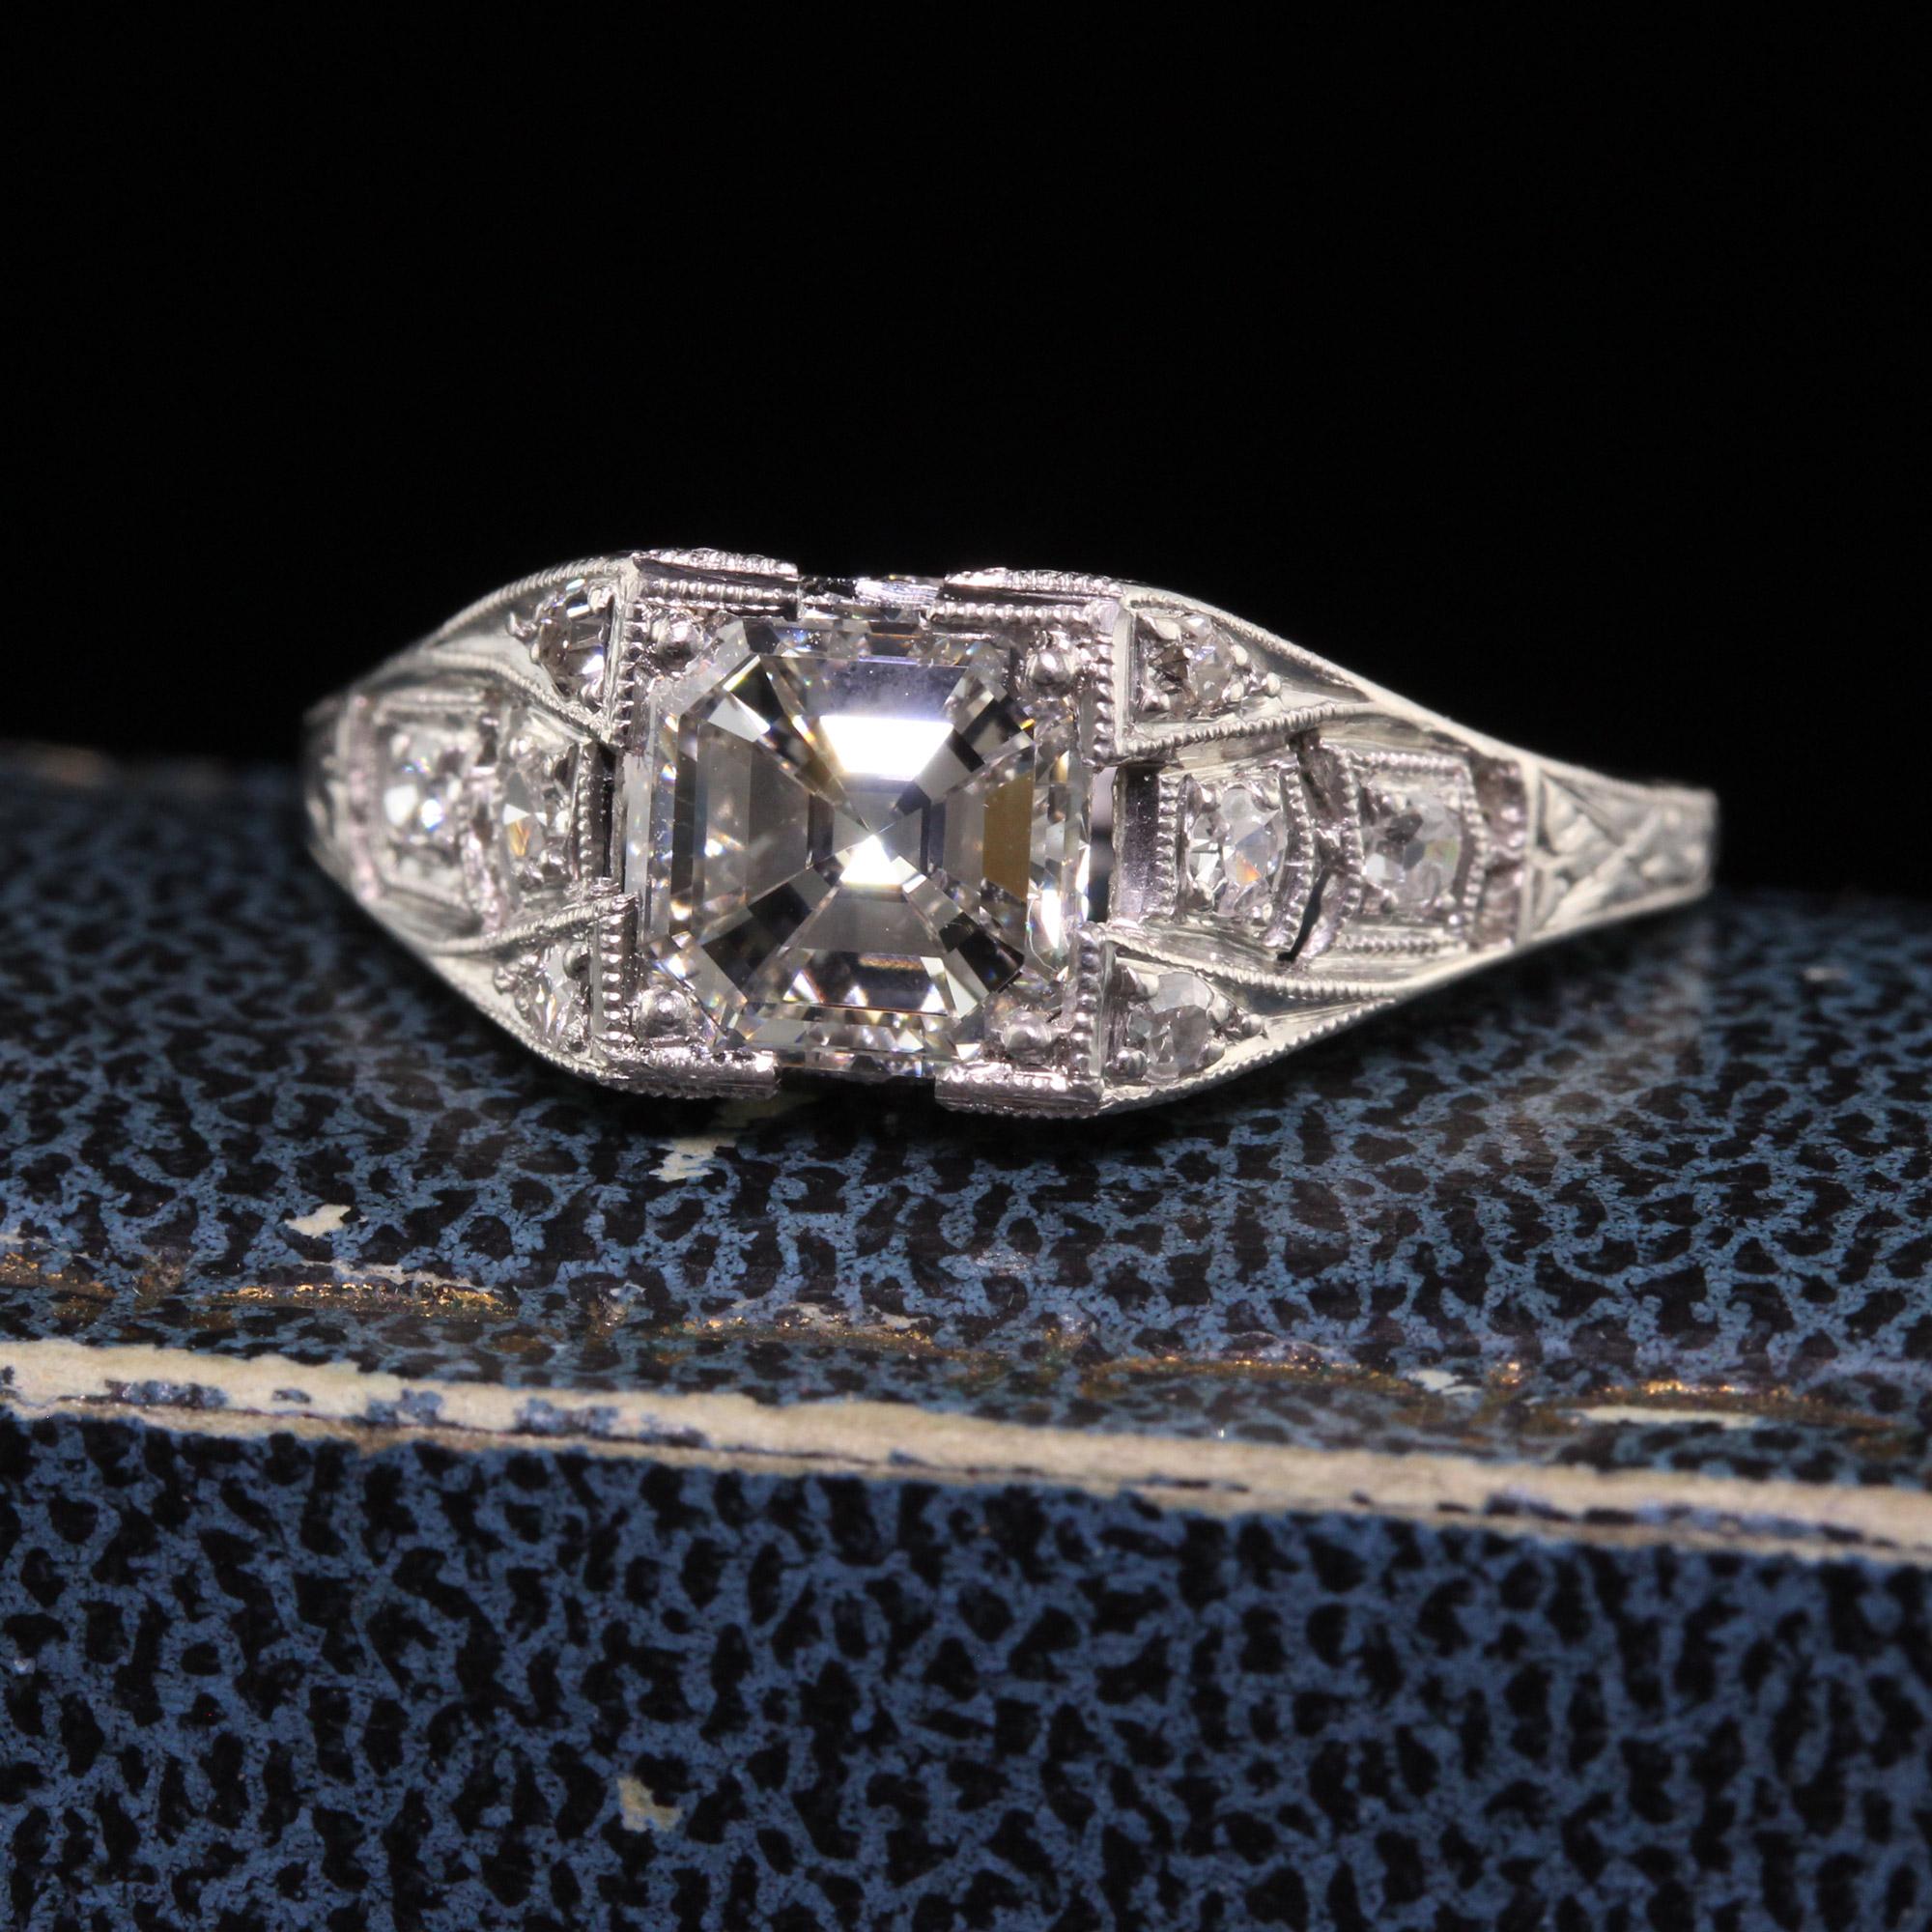 Beautiful Antique Art Deco Platinum Asscher Cut Diamond Engagement Ring - Size 6 1/4. This incredible engagement ring is crafted in platinum. The center holds a GIA certified Asscher cut diamond and is set in a gorgeous art deco mounting. The ring